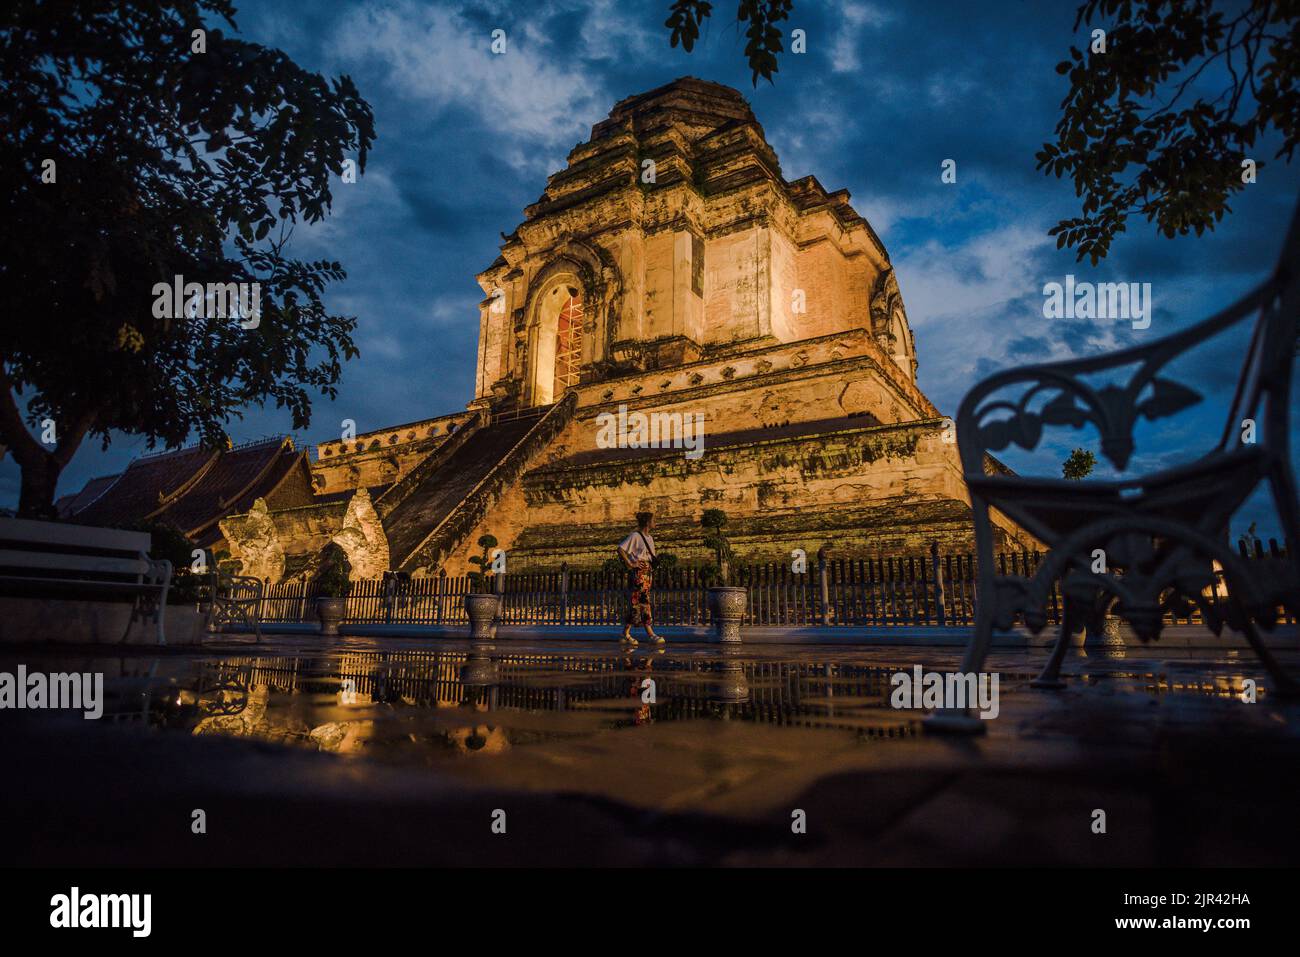 Ancient collapse pagoda in Chedi Luang temple with tourist walking in rainy day. Stock Photo